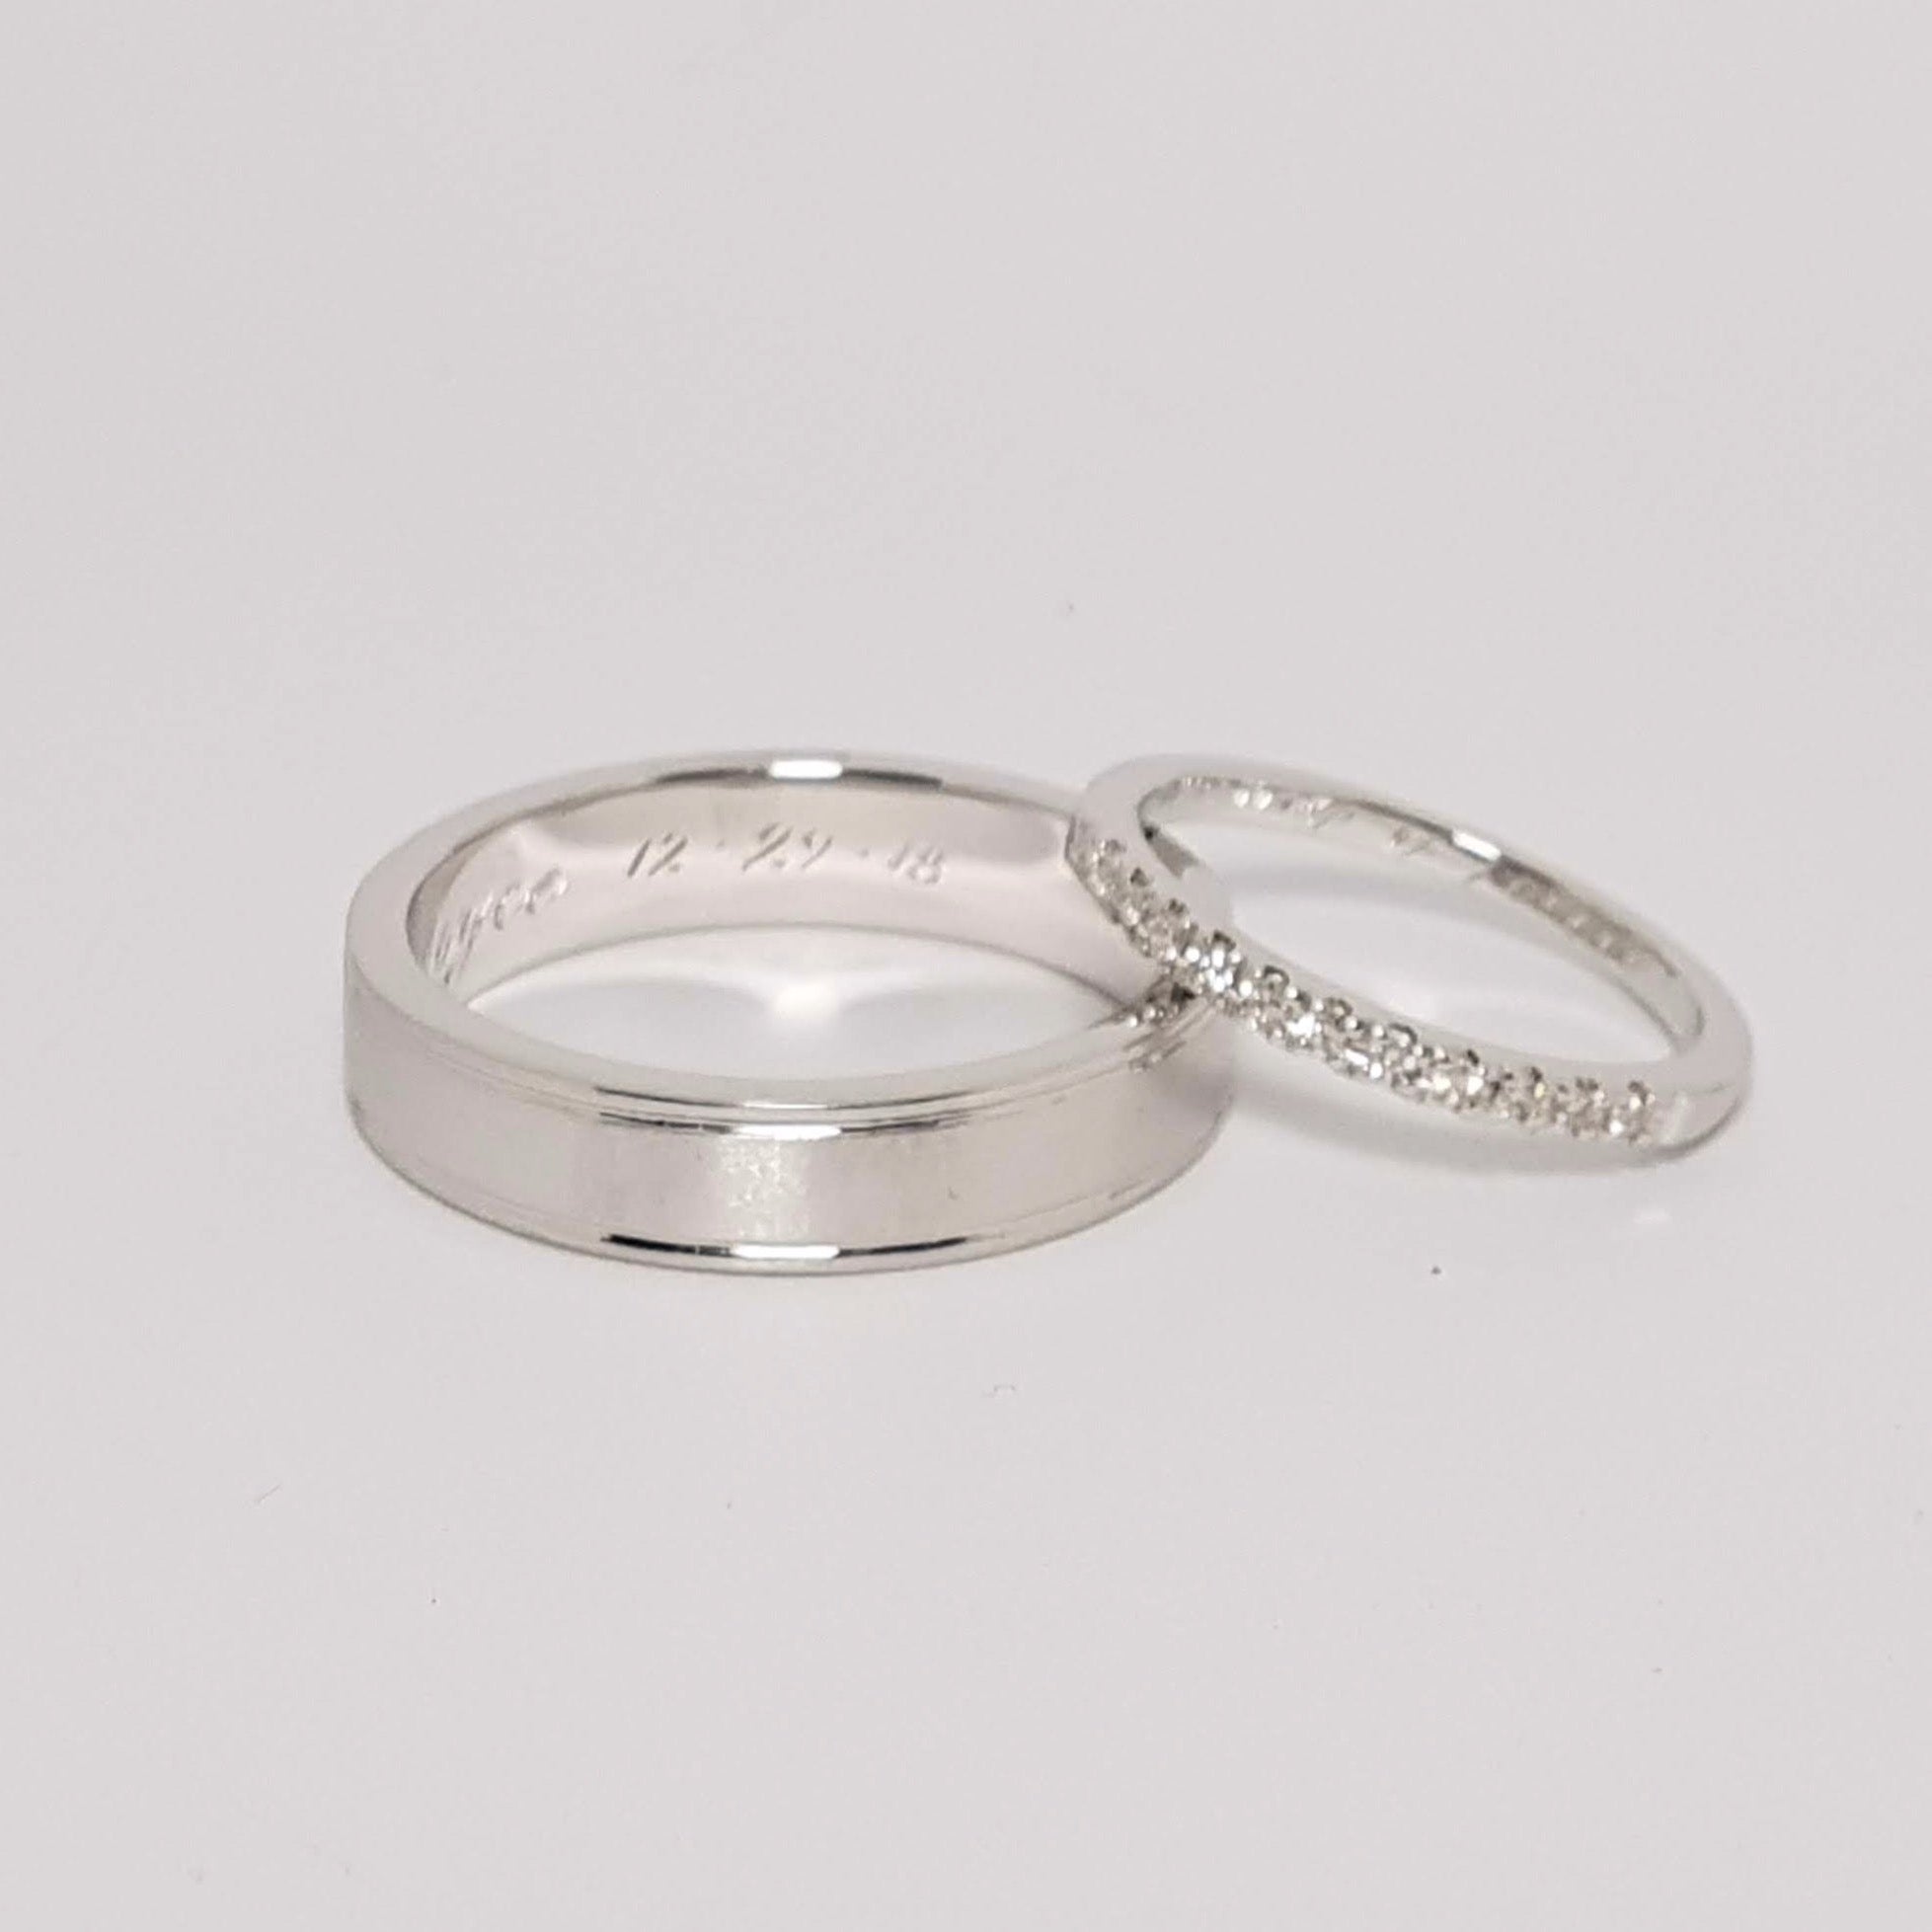 Claire Wedding Ring